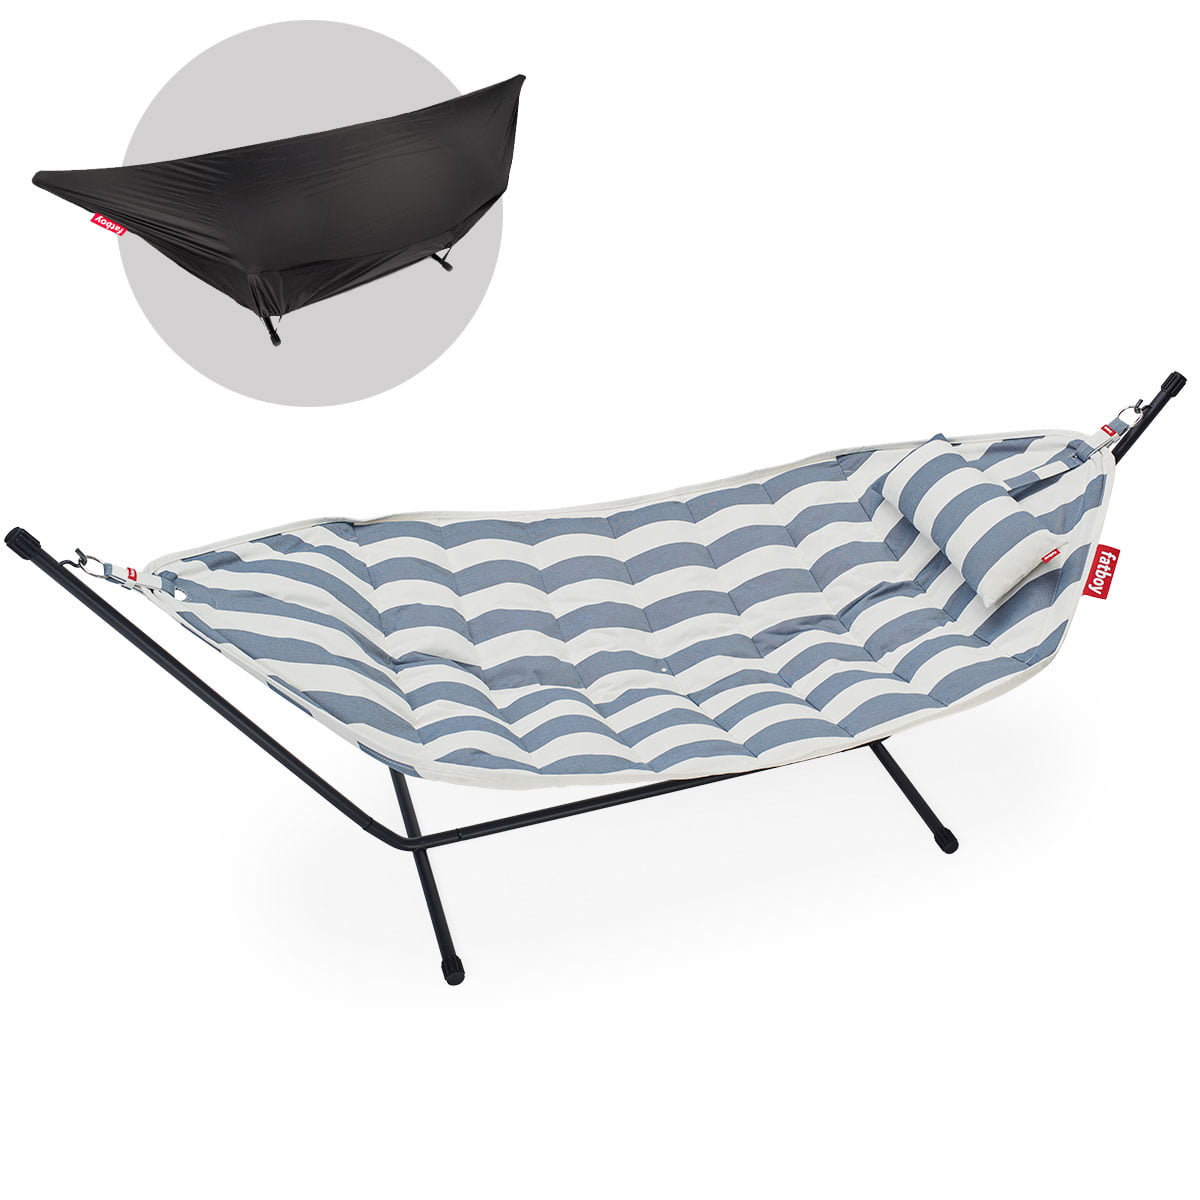 Leidingen klauw Implementeren Fatboy - Headdemock Hammock Superb Deluxe with frame, pillow and cover |  Connox